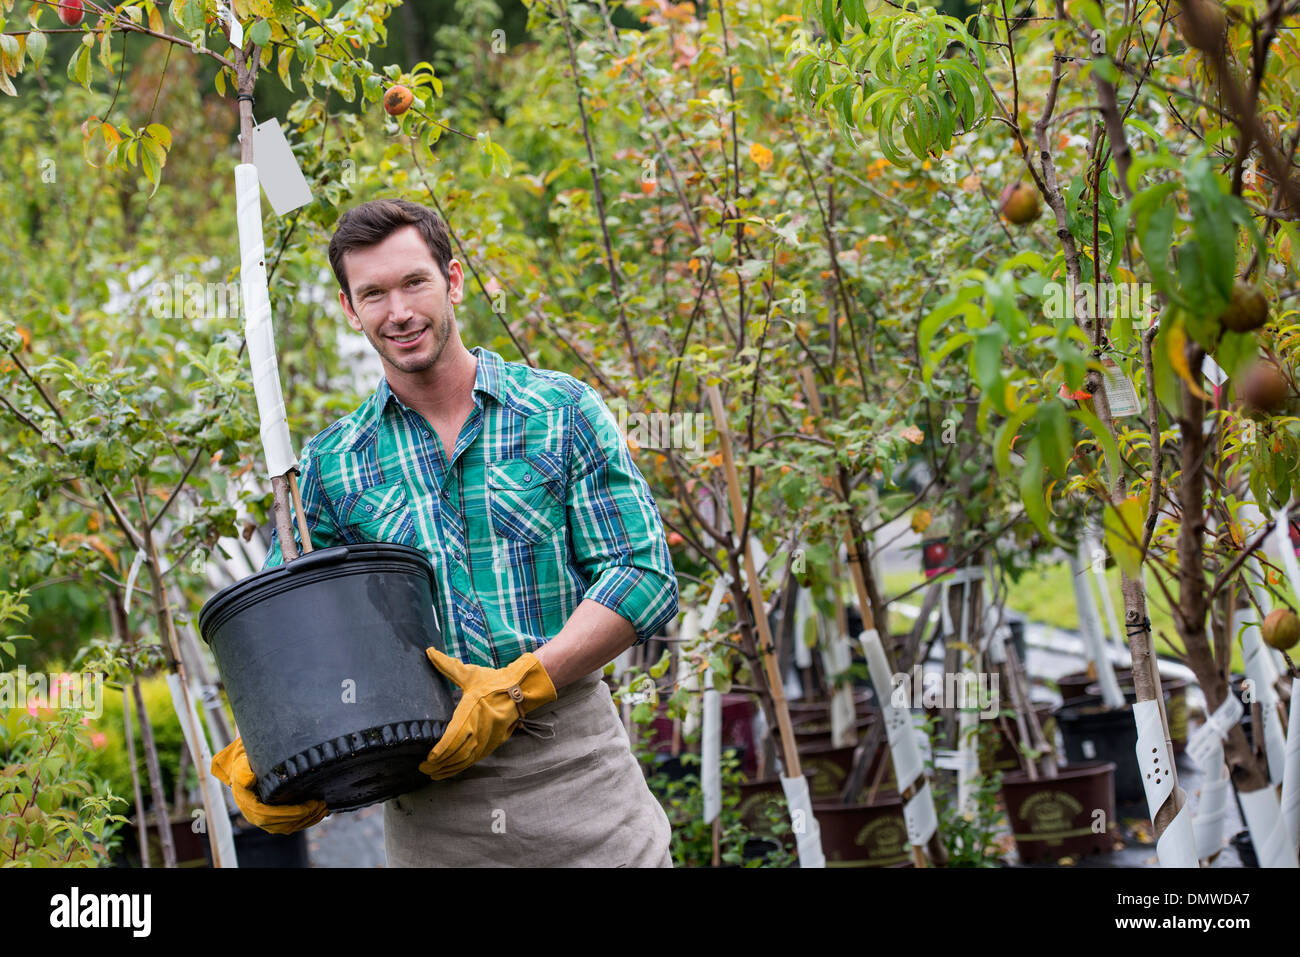 An organic flower plant nursery. A man working carrying a sapling tree in a pot. Stock Photo